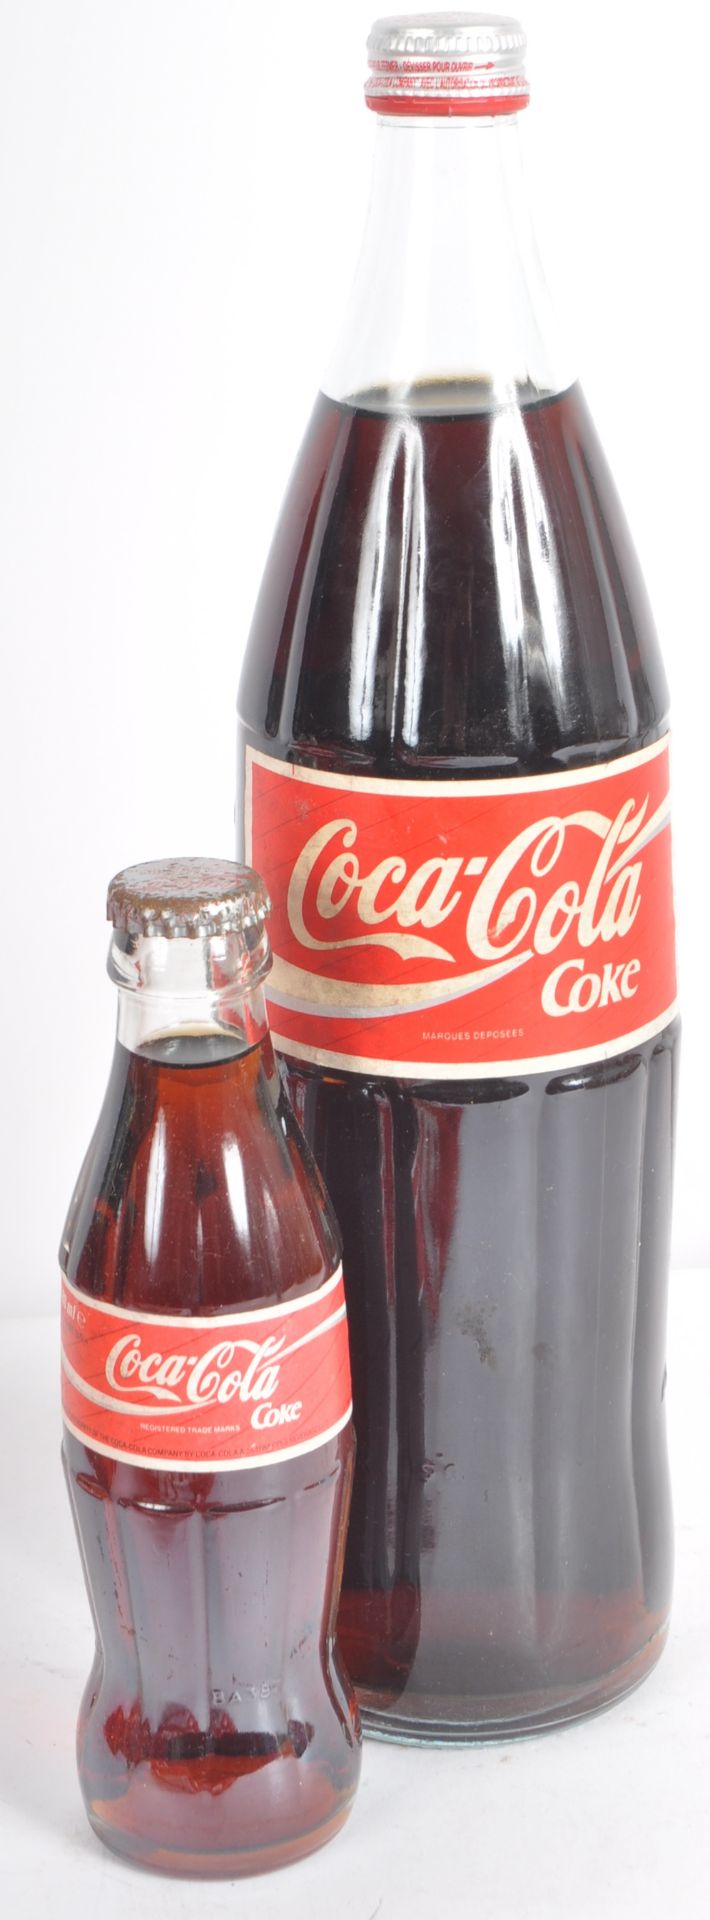 COCA COLA - SELECTION OF VINTAGE MERCHANDISE & ADVERTISING - Image 11 of 20